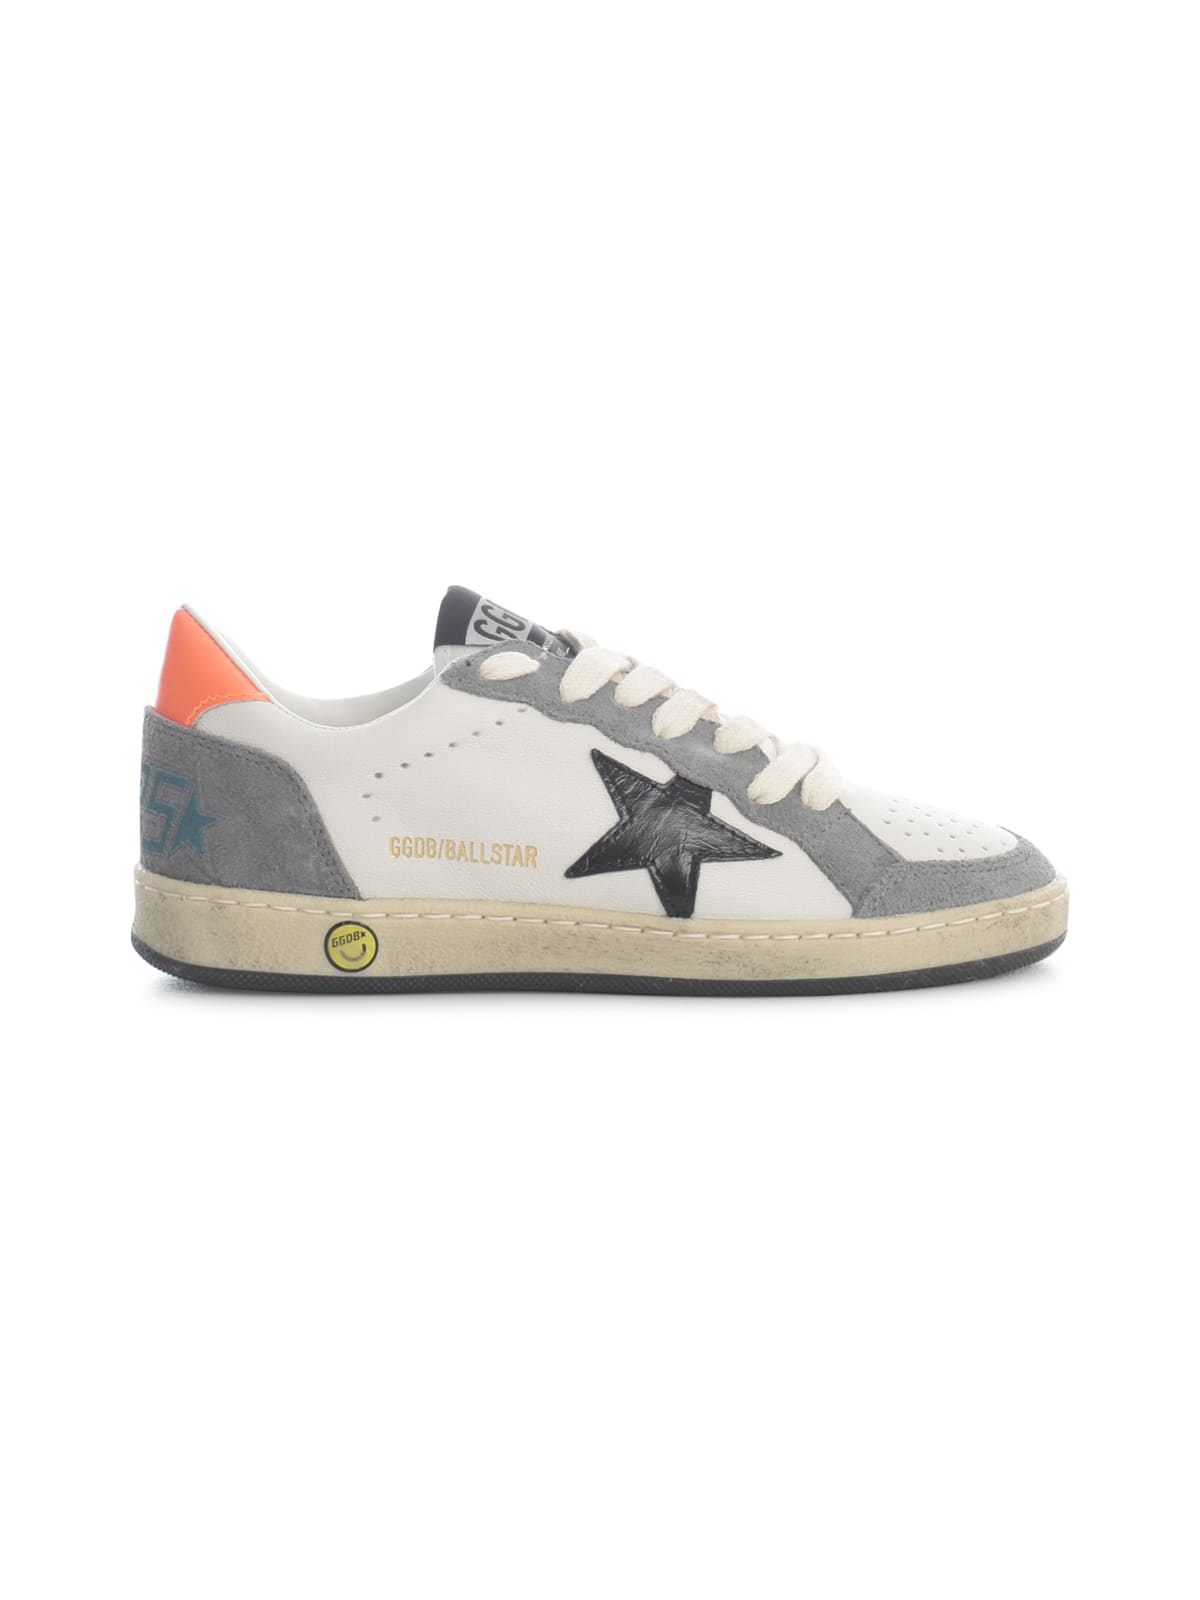 Golden Goose Ball Star Leather Upper Shiny Leather Star Suede Heel